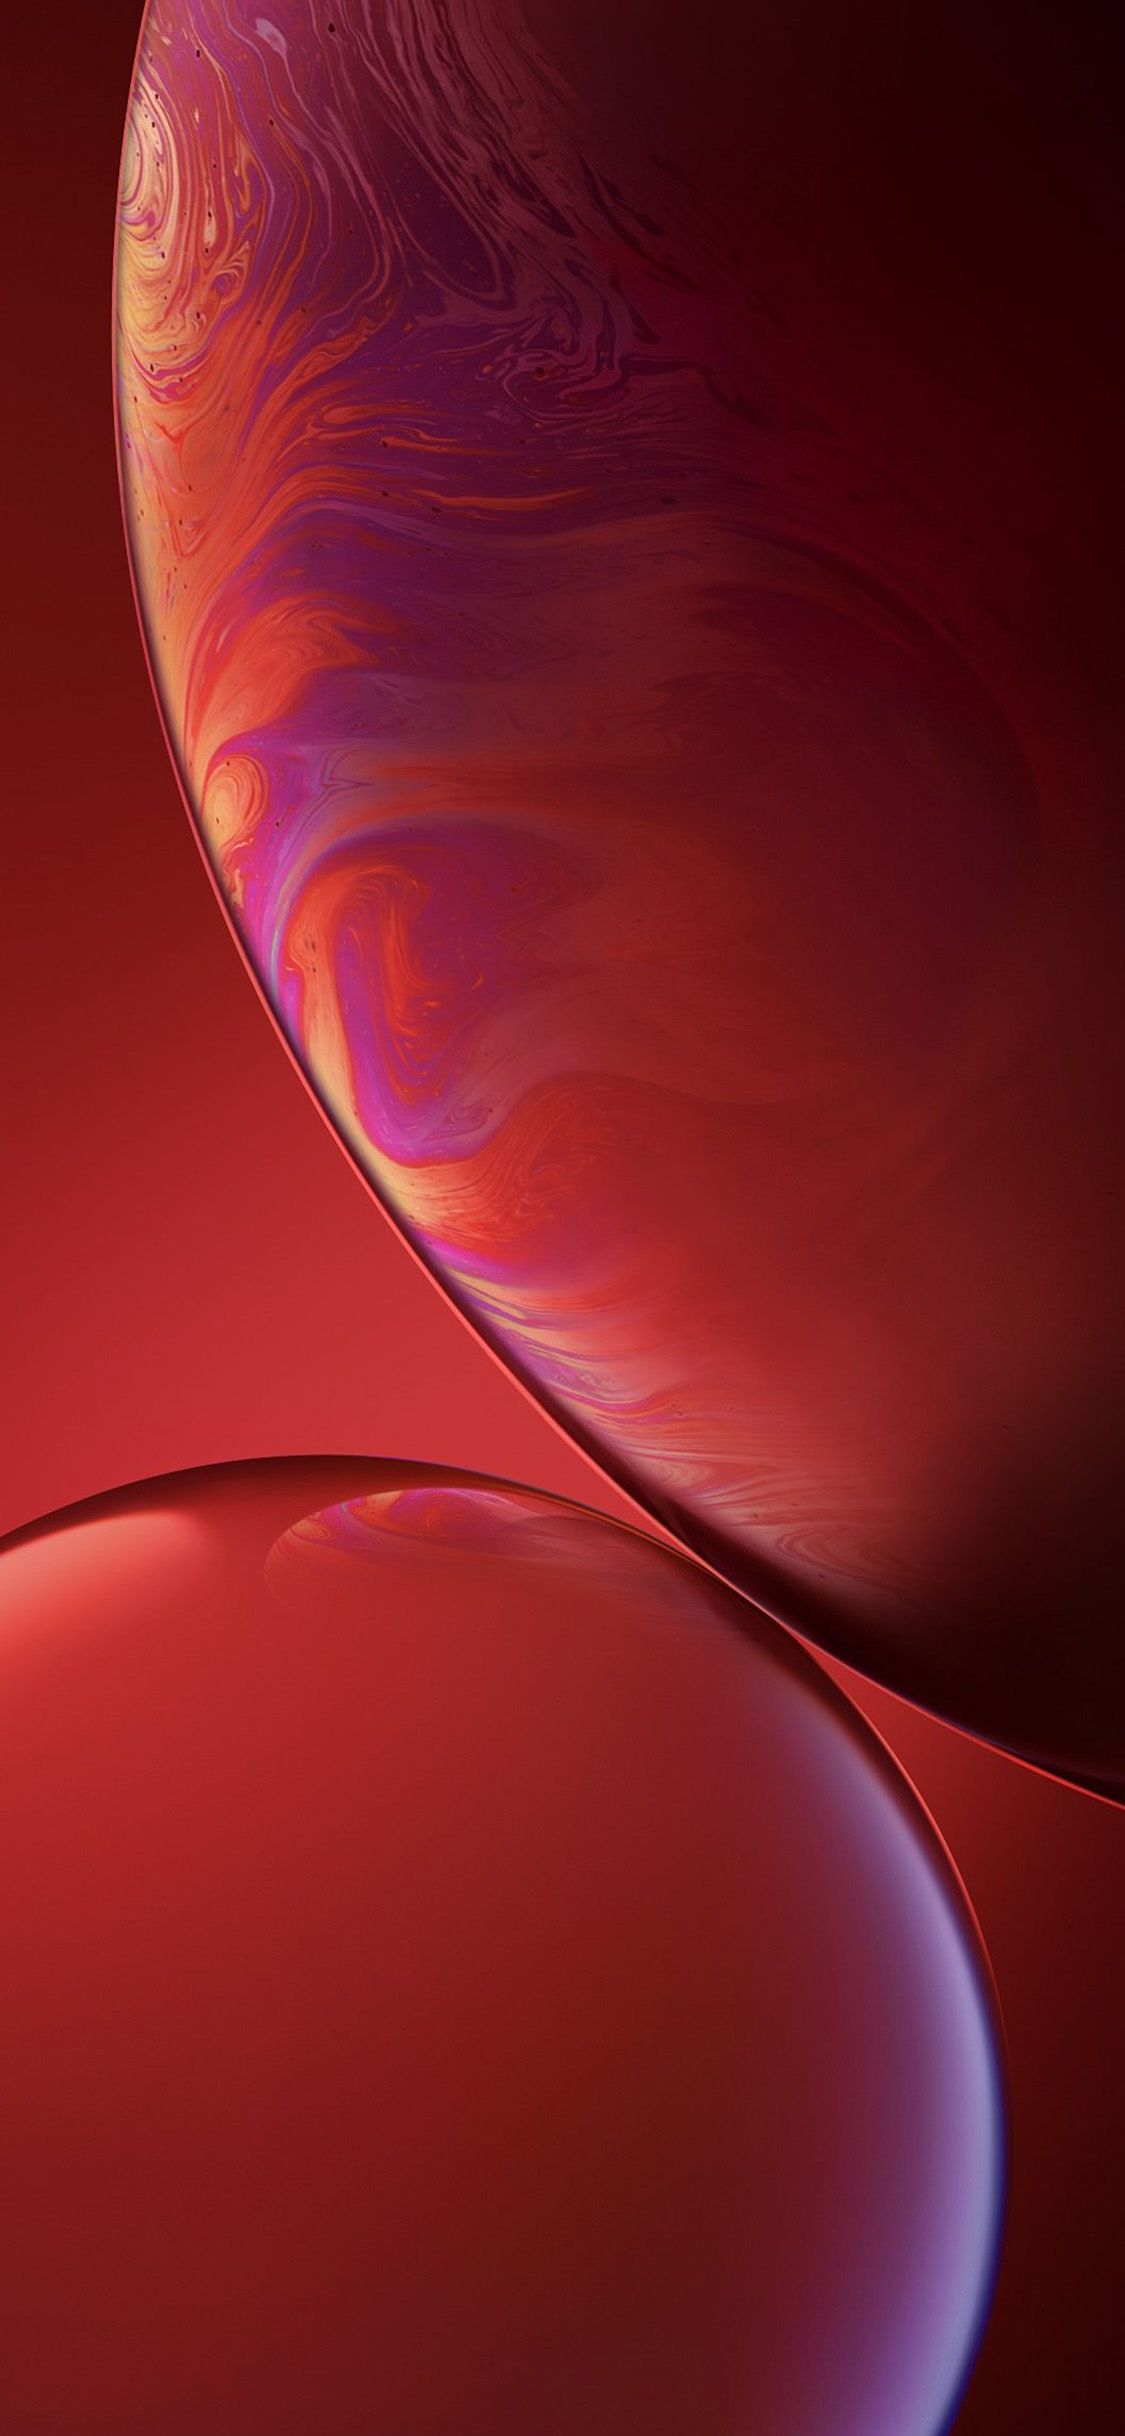 Iphone Xs Max Apple Official Art Red Bubble Wallpaper